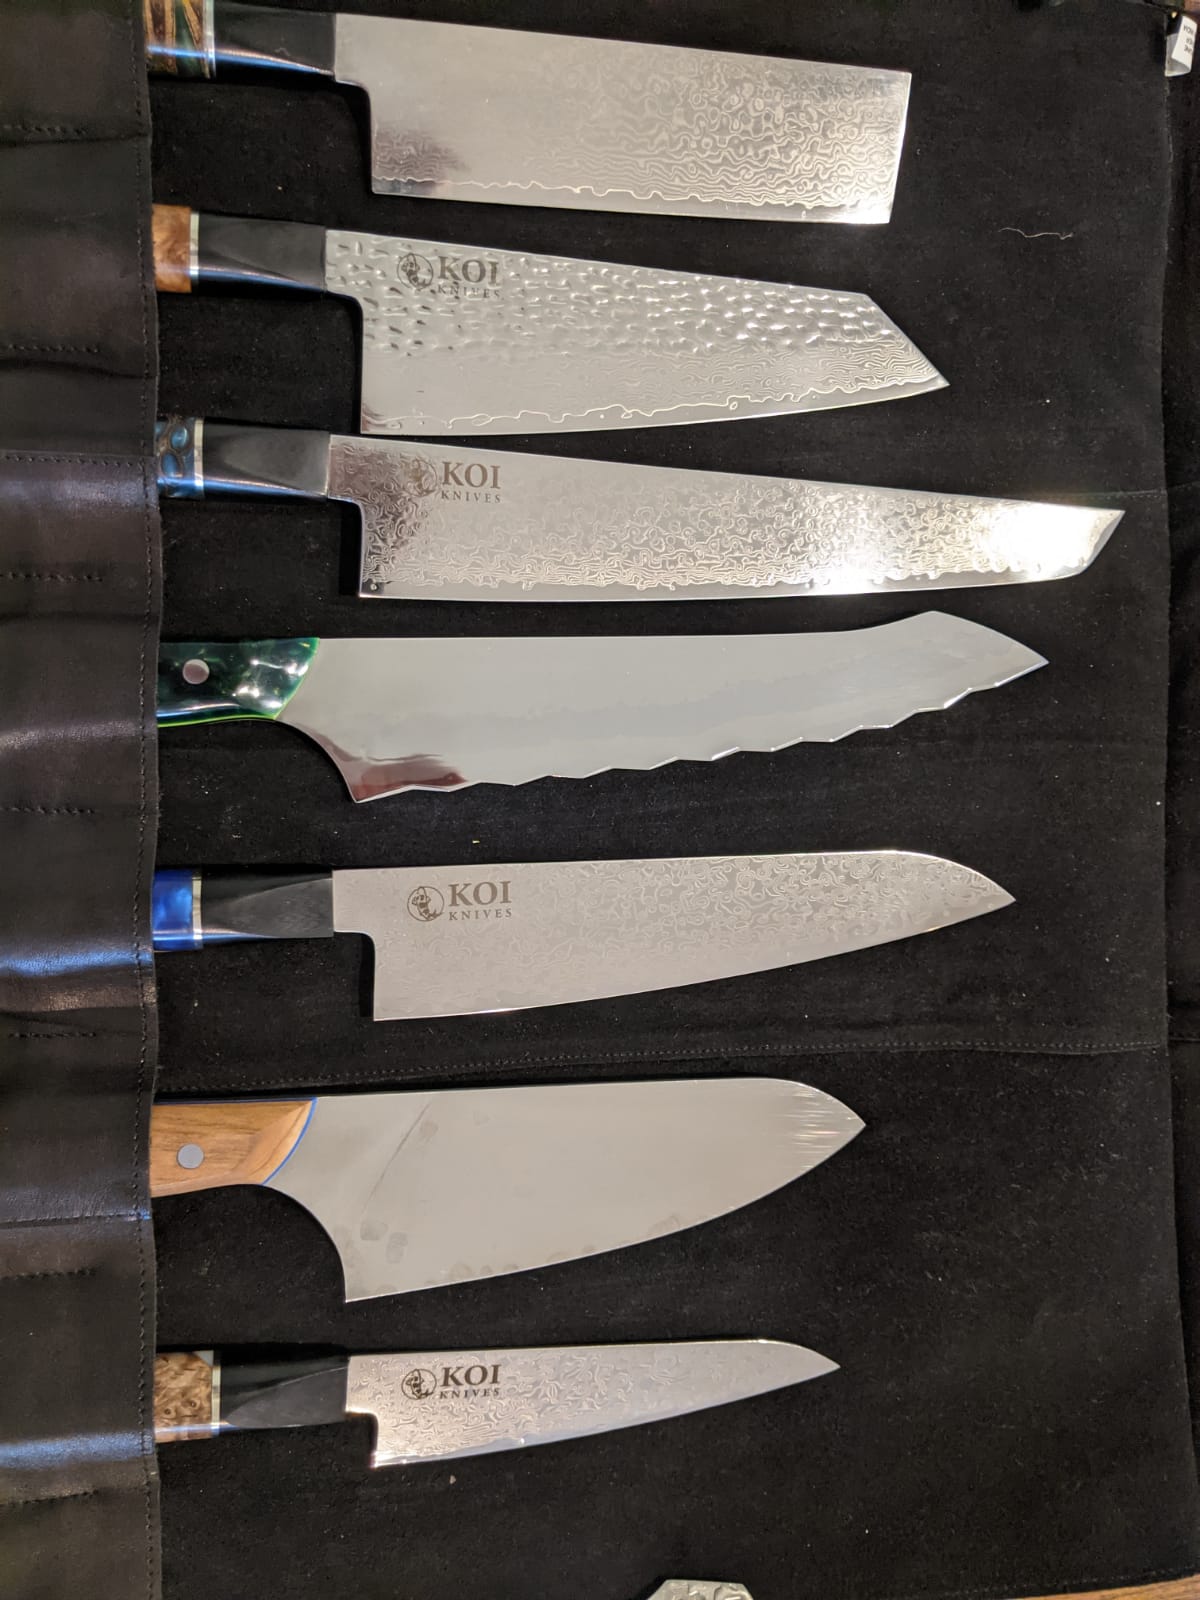 Sharpening knives - a collection of good tips and tricks 